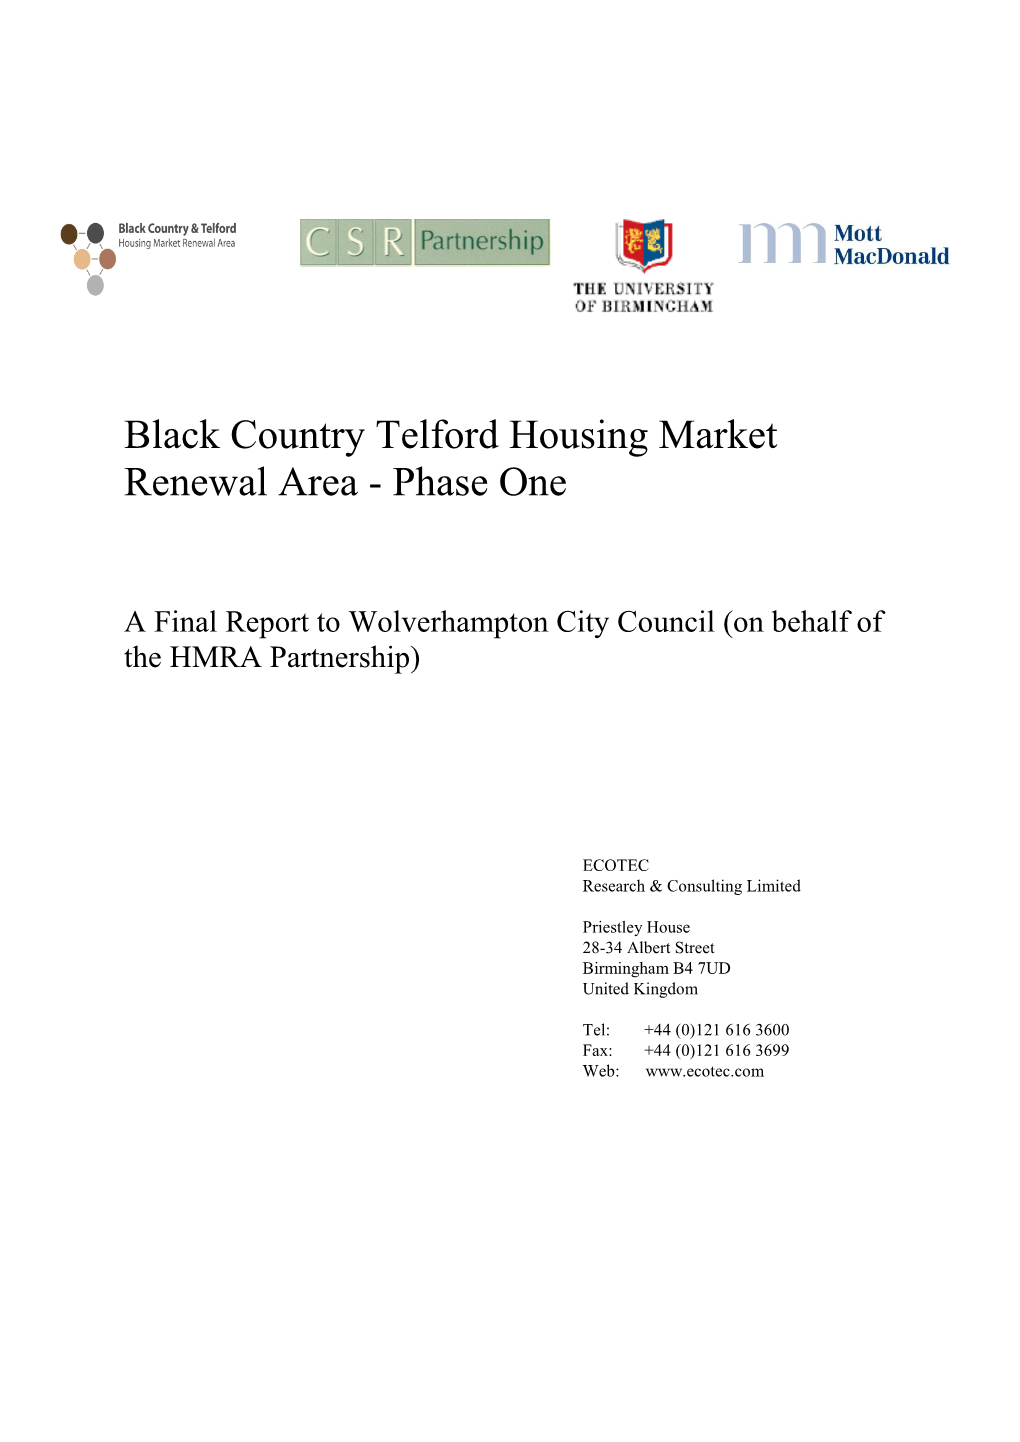 Black Country Telford Housing Market Renewal Area - Phase One